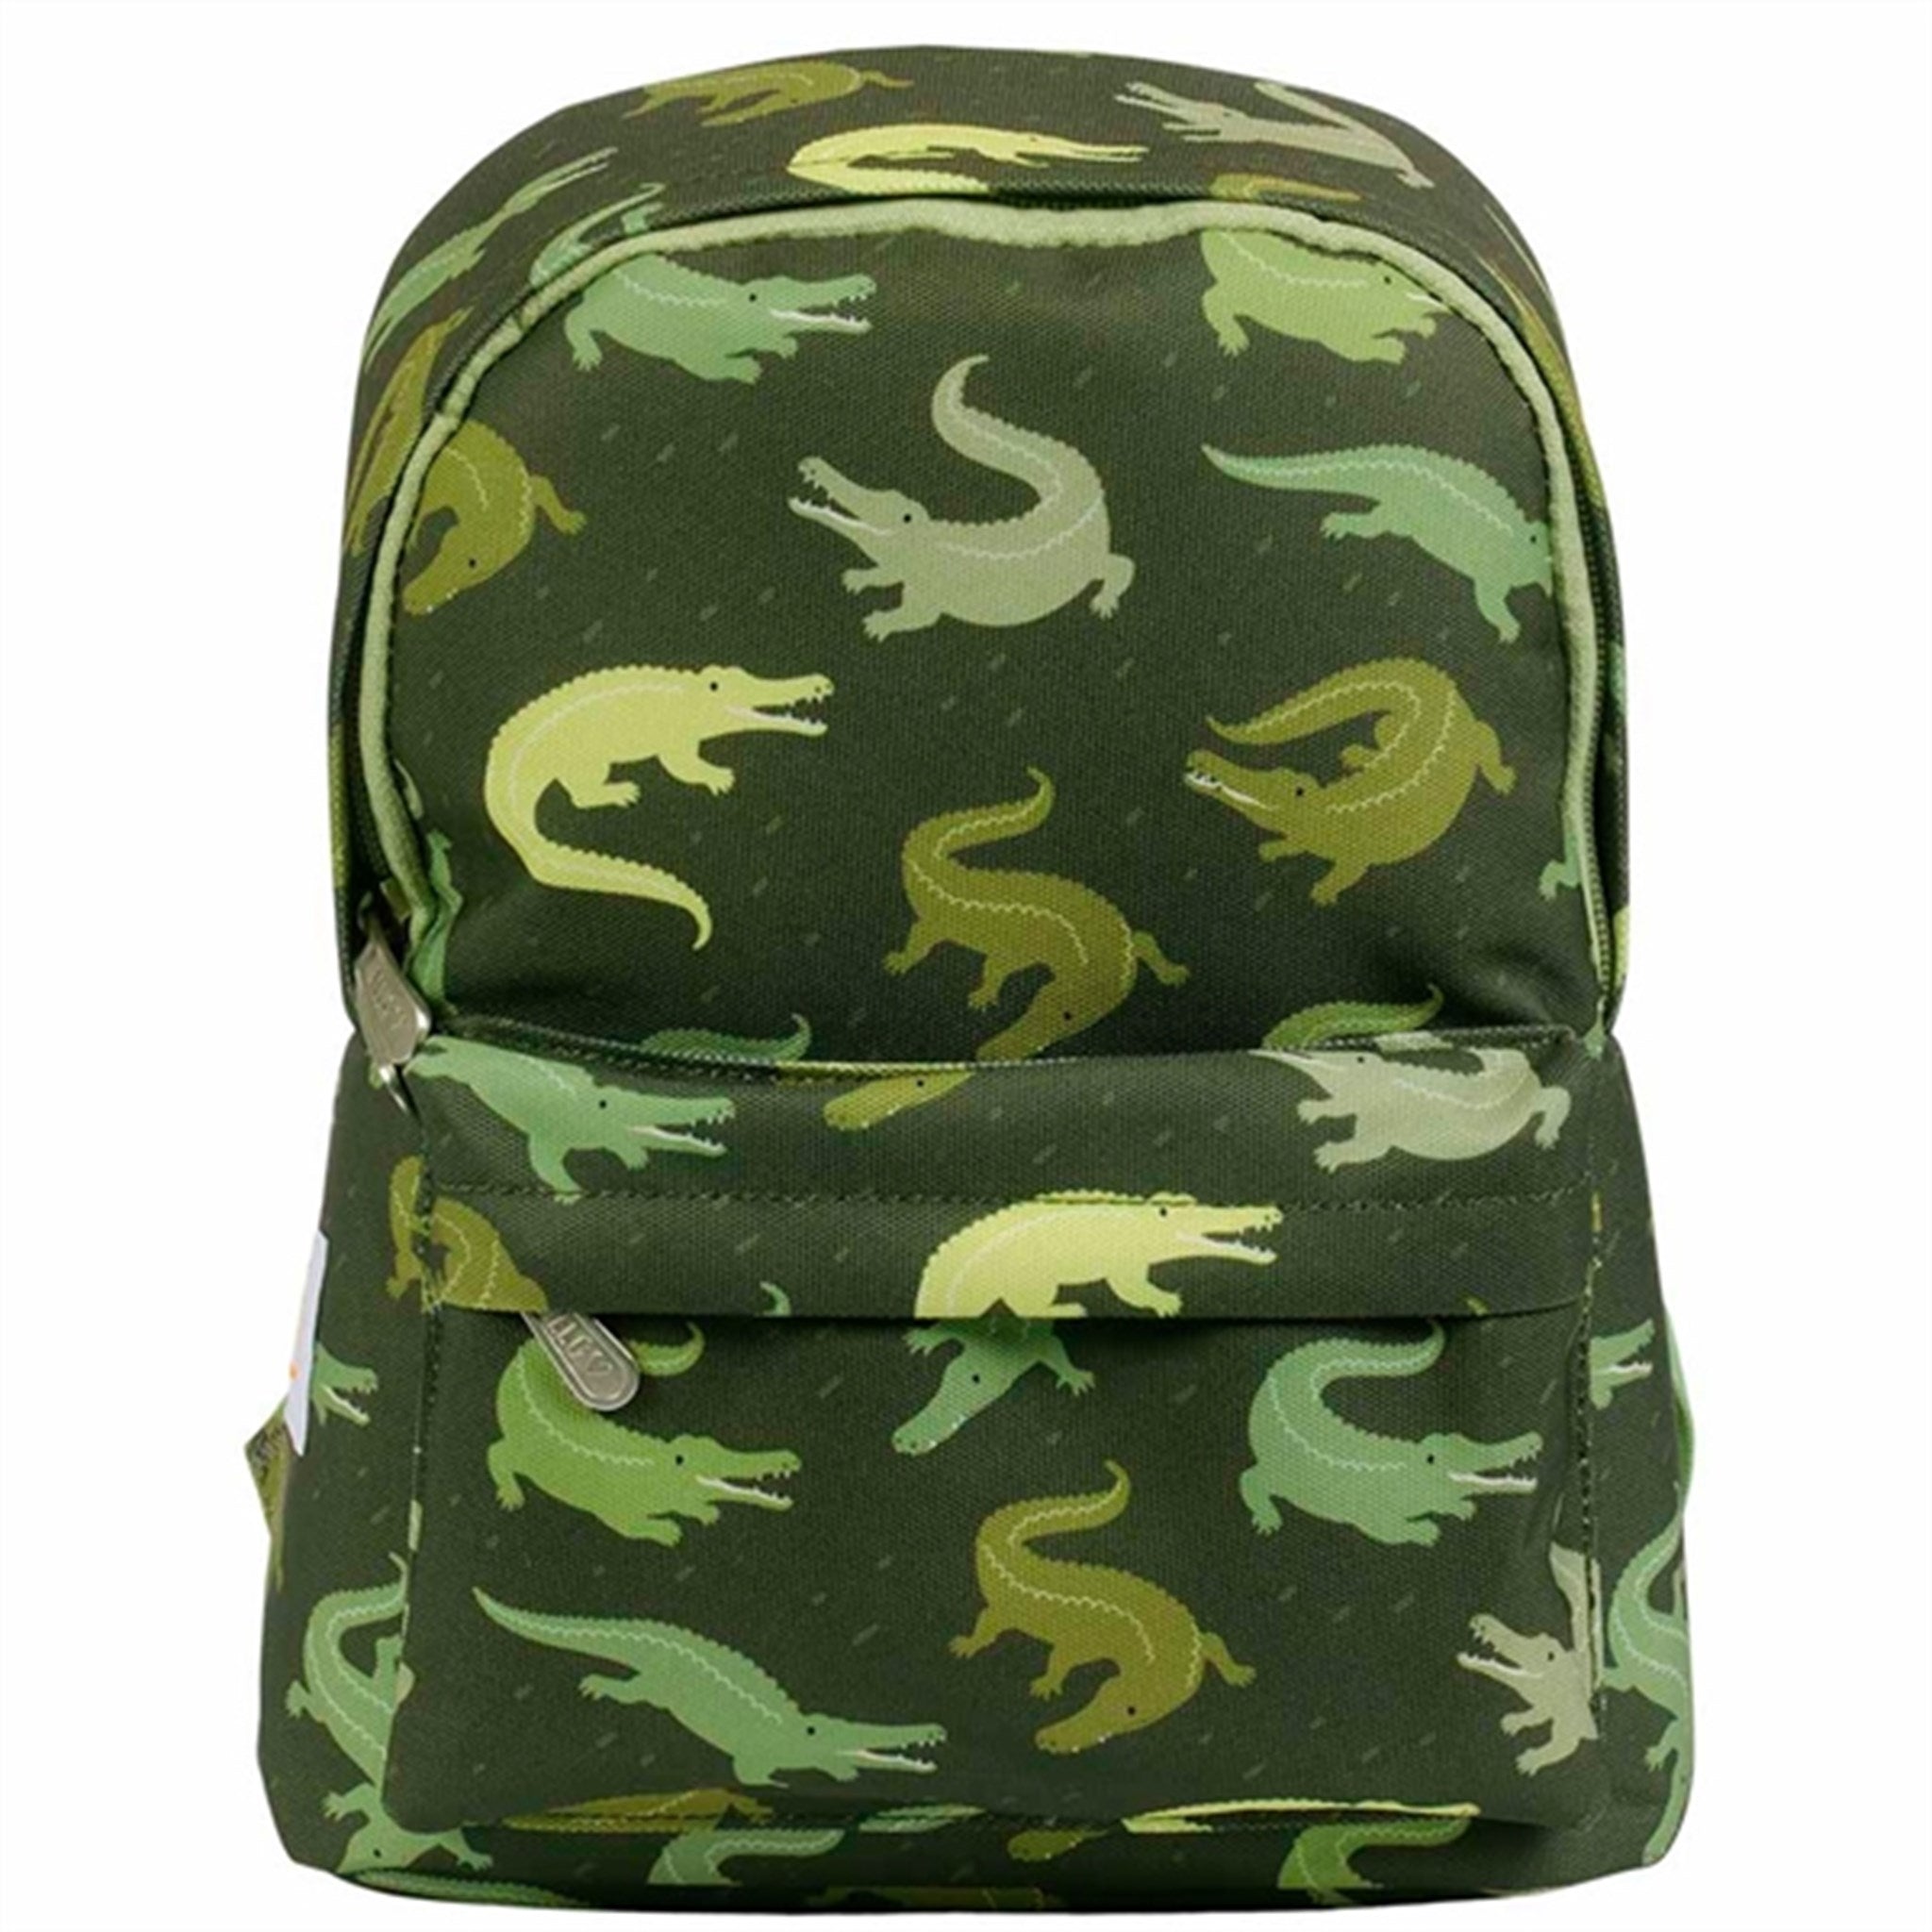 A Little Lovely Company Backpack Small Crocodiles